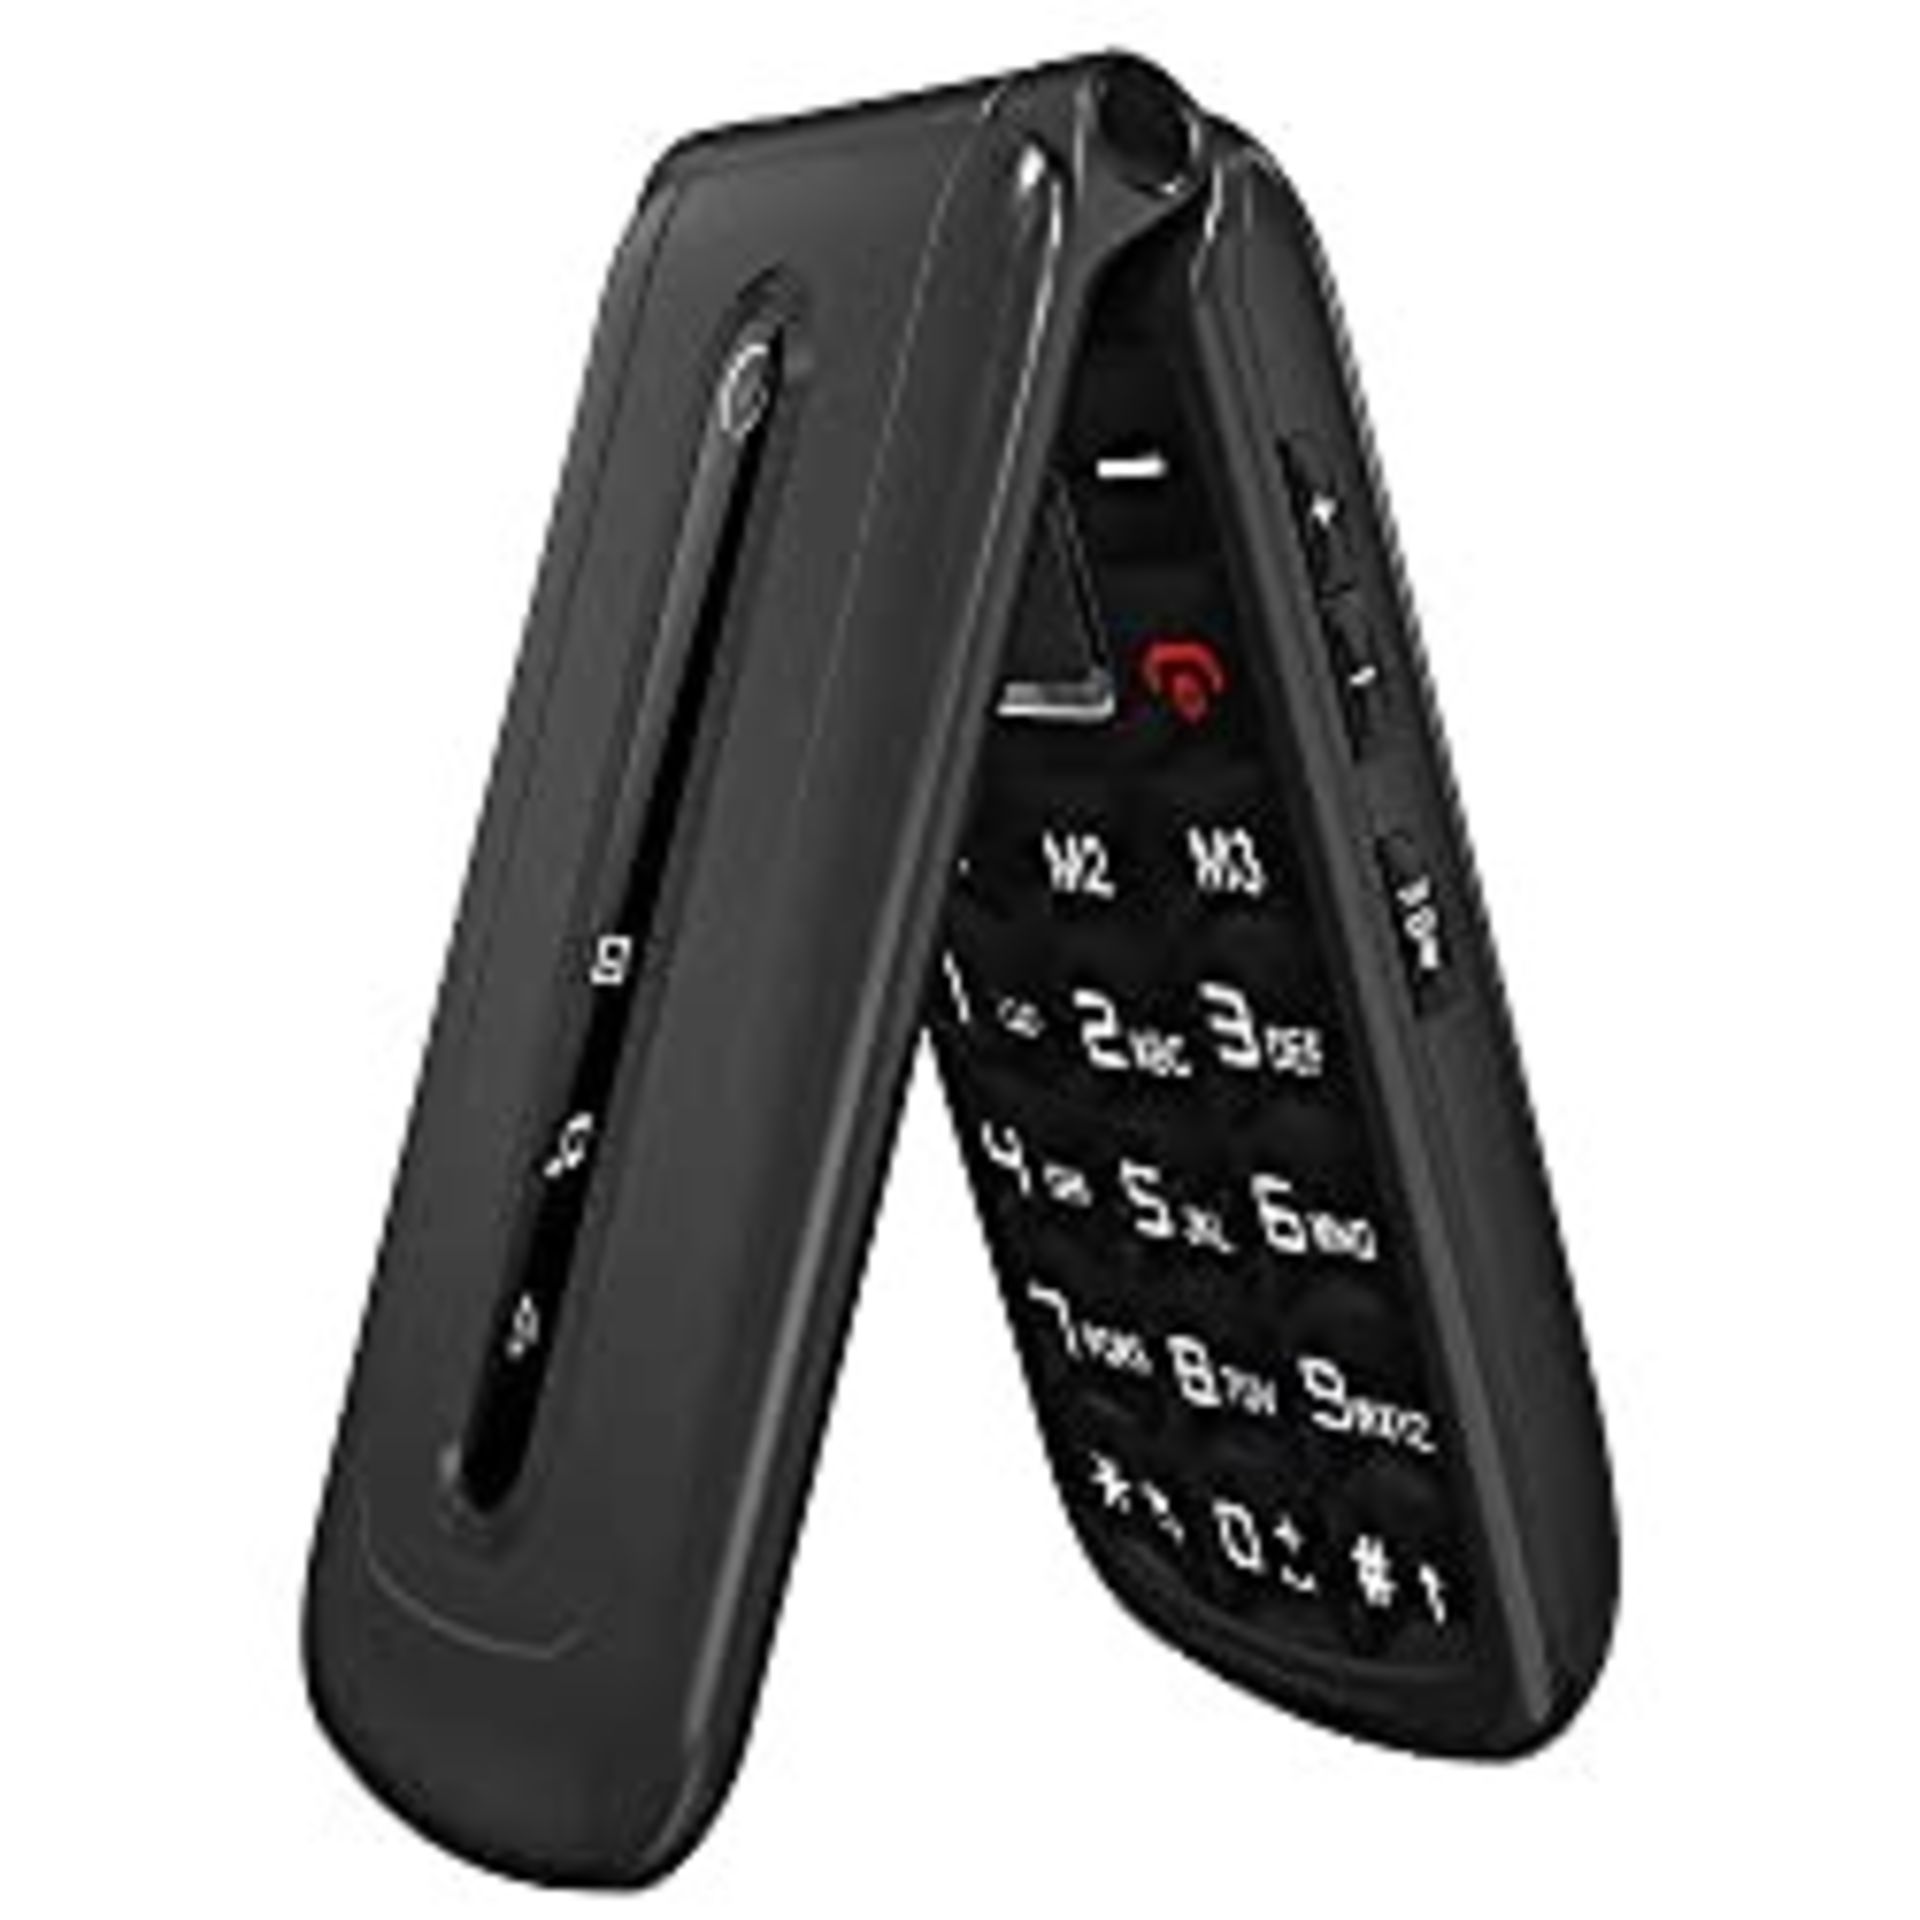 3G Big Button Basic Mobile Phones Unlocked,Dual Sim Free Flip Mobile Phone with SOS,Pay As You